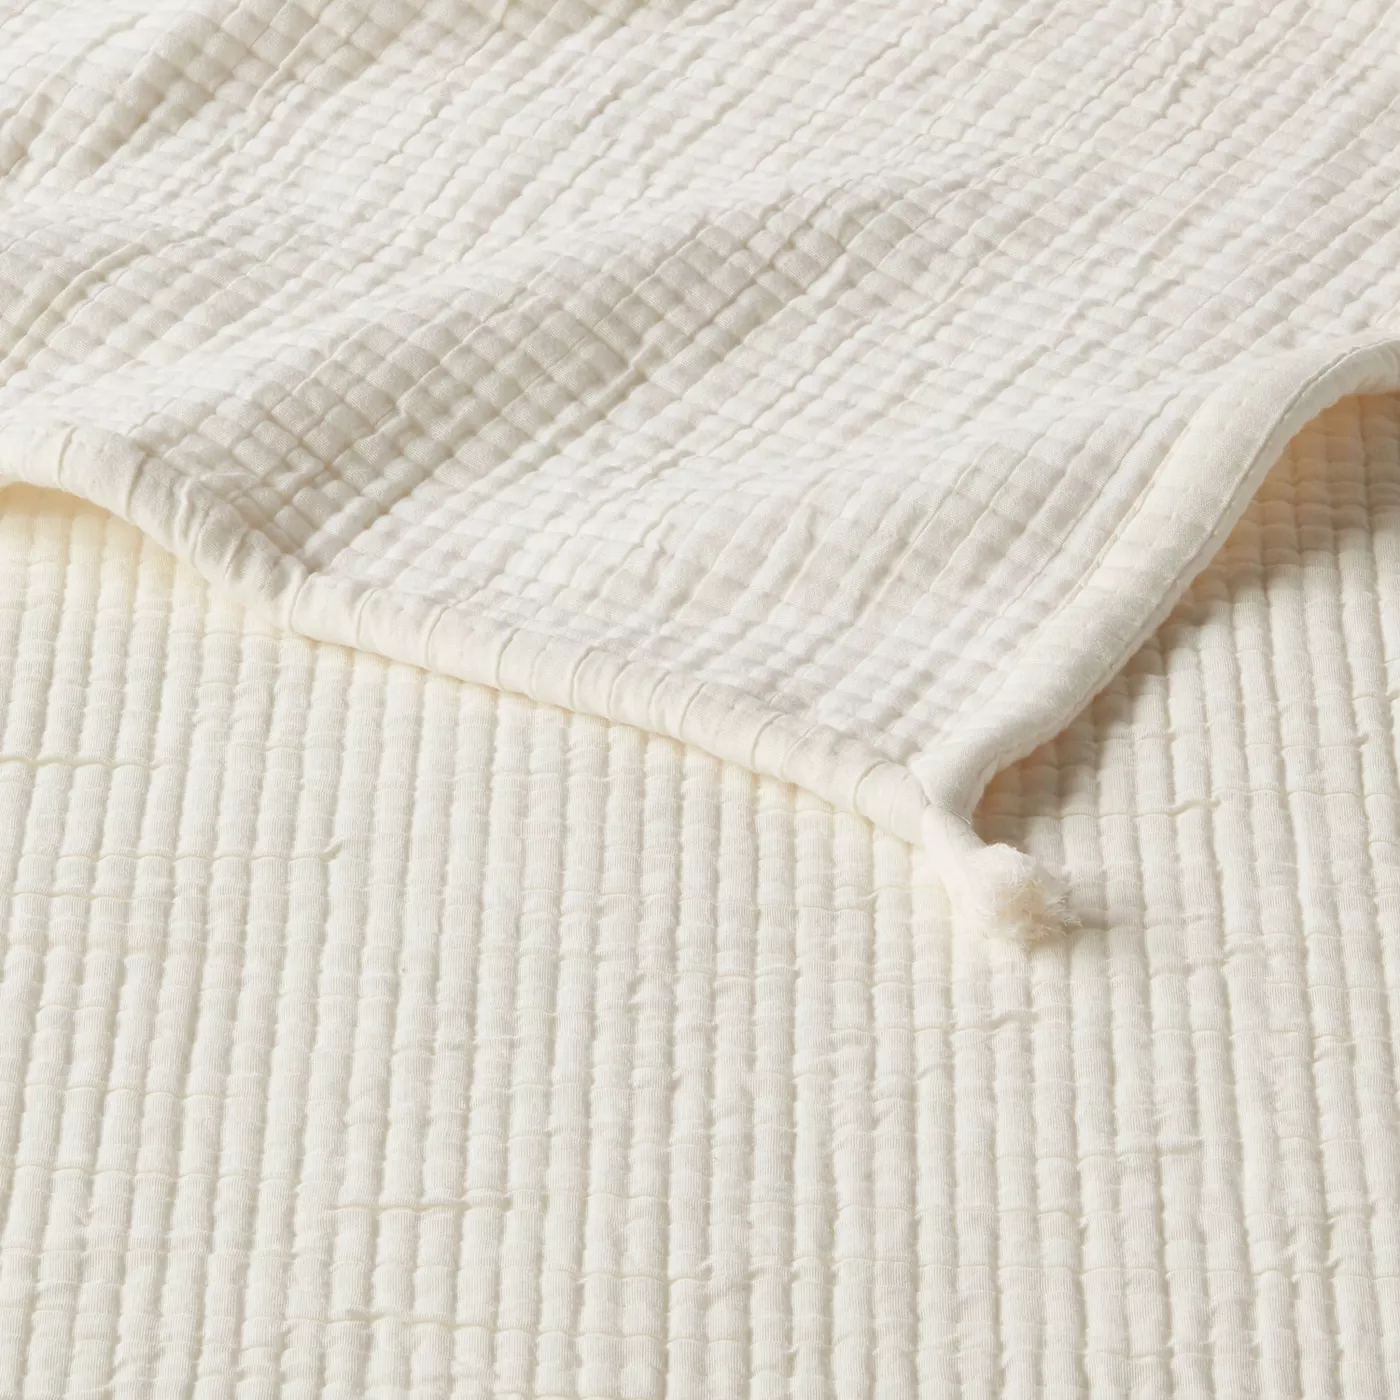 Shop Full/Queen Double Cloth Quilt Cream - Threshold from Target on Openhaus